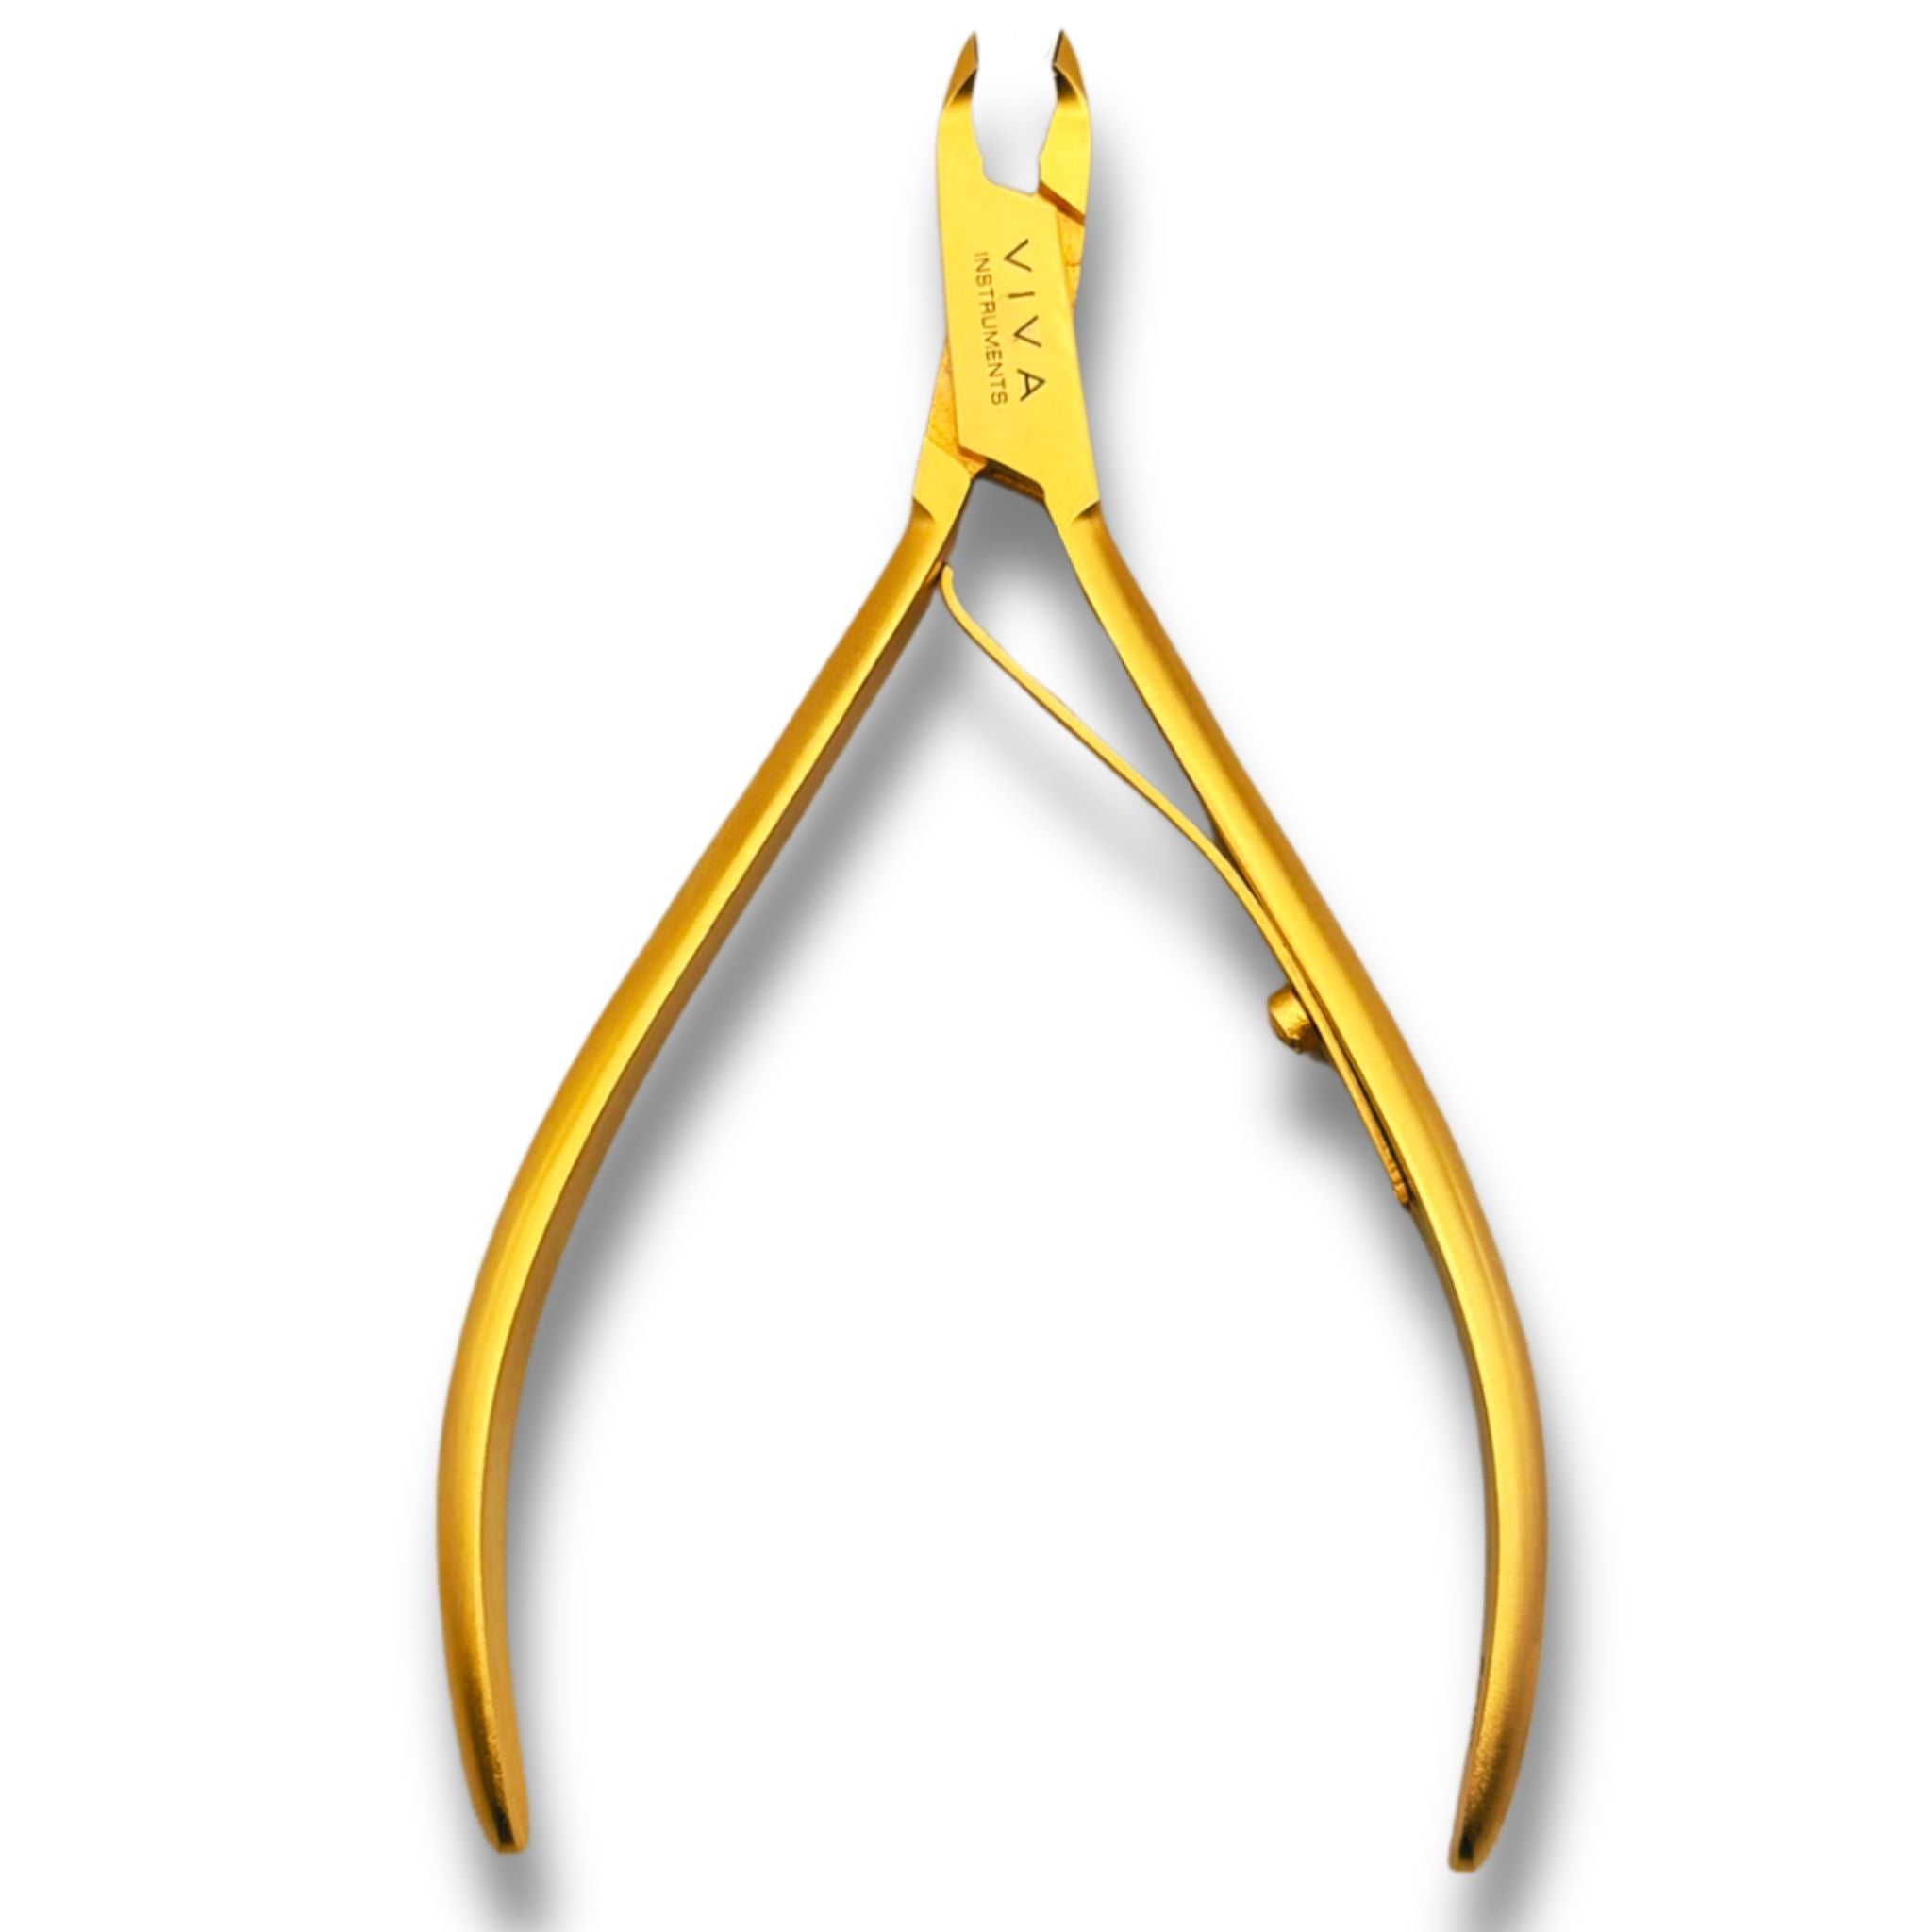 cuticle nippers professional manicure tools - viva instruments